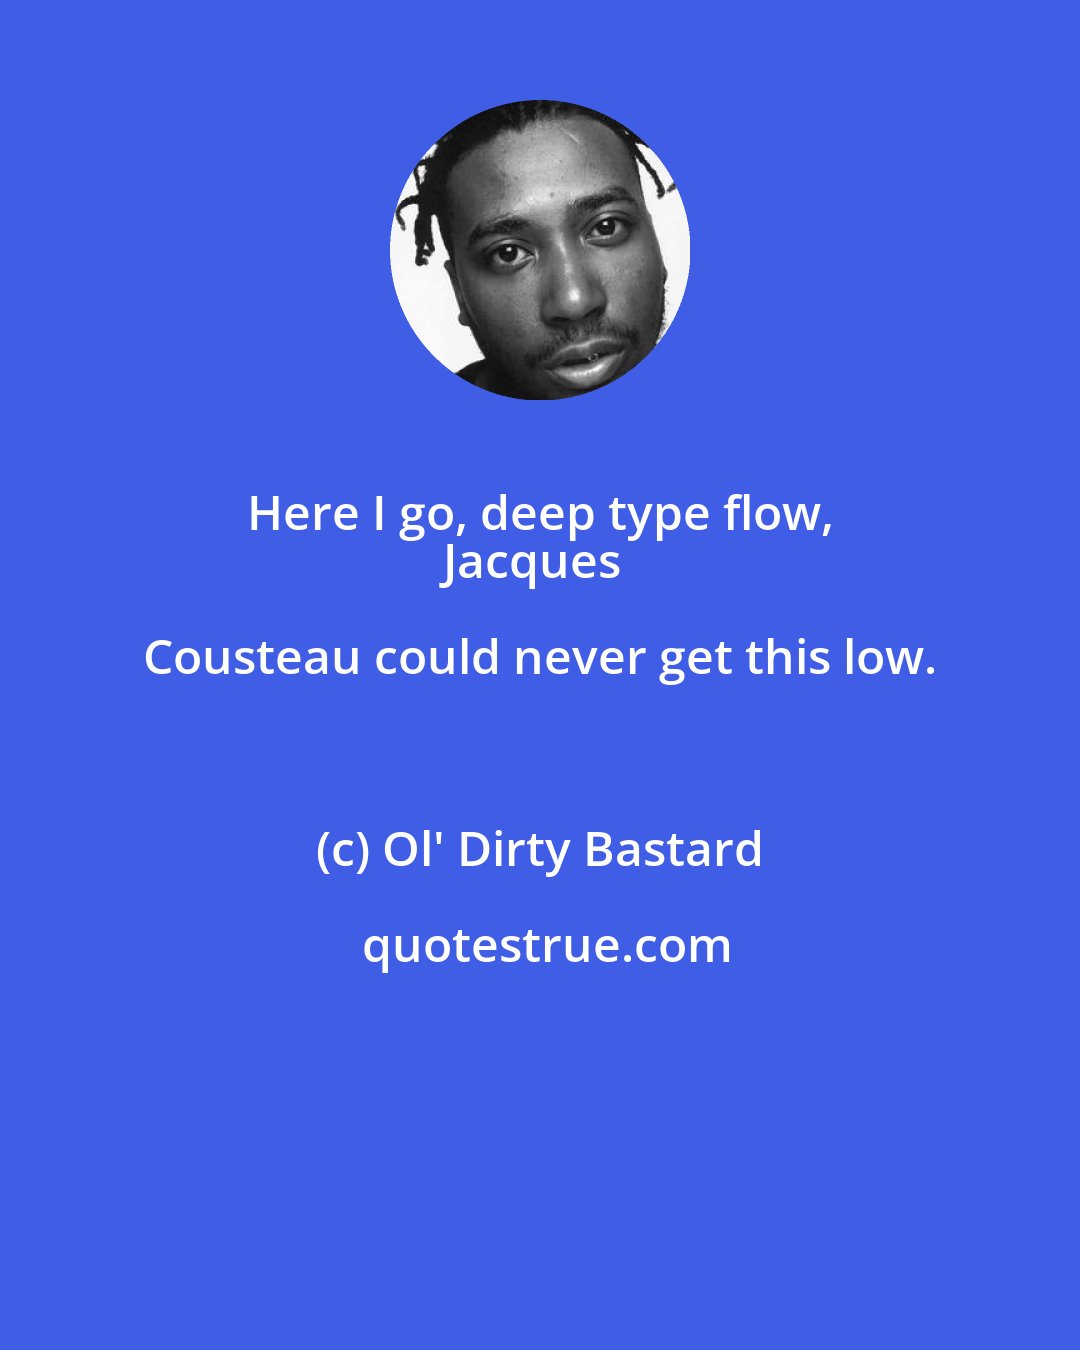 Ol' Dirty Bastard: Here I go, deep type flow, 
Jacques Cousteau could never get this low.